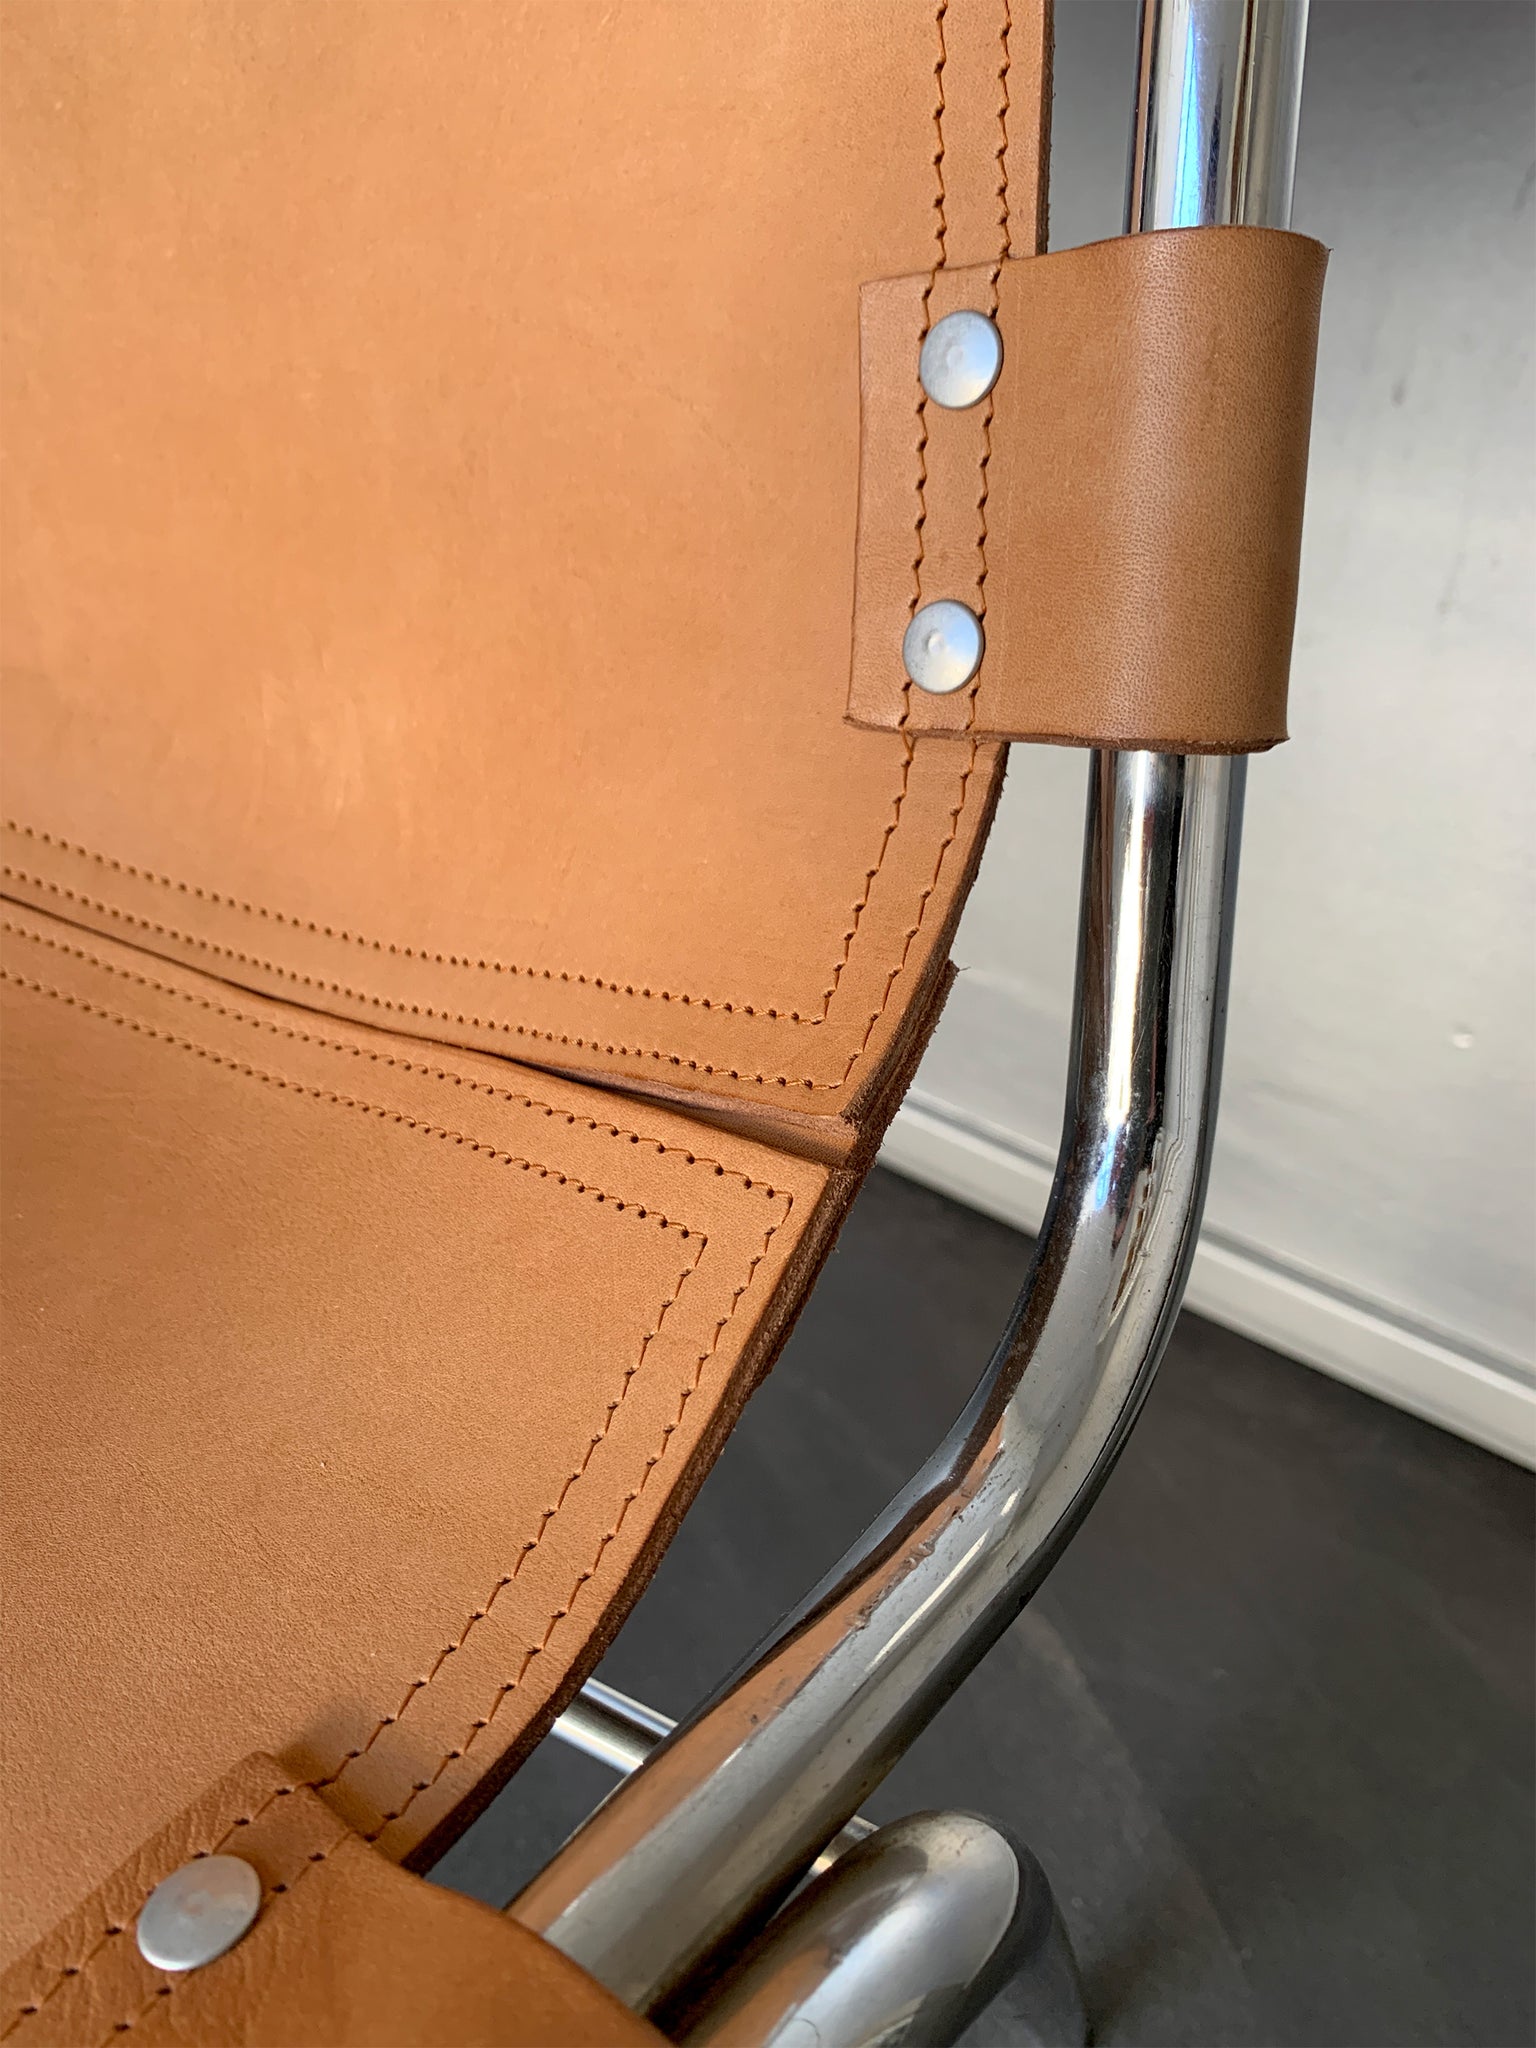 Vintage Les Arcs leather chair, Charlotte Perriand selection, 1960